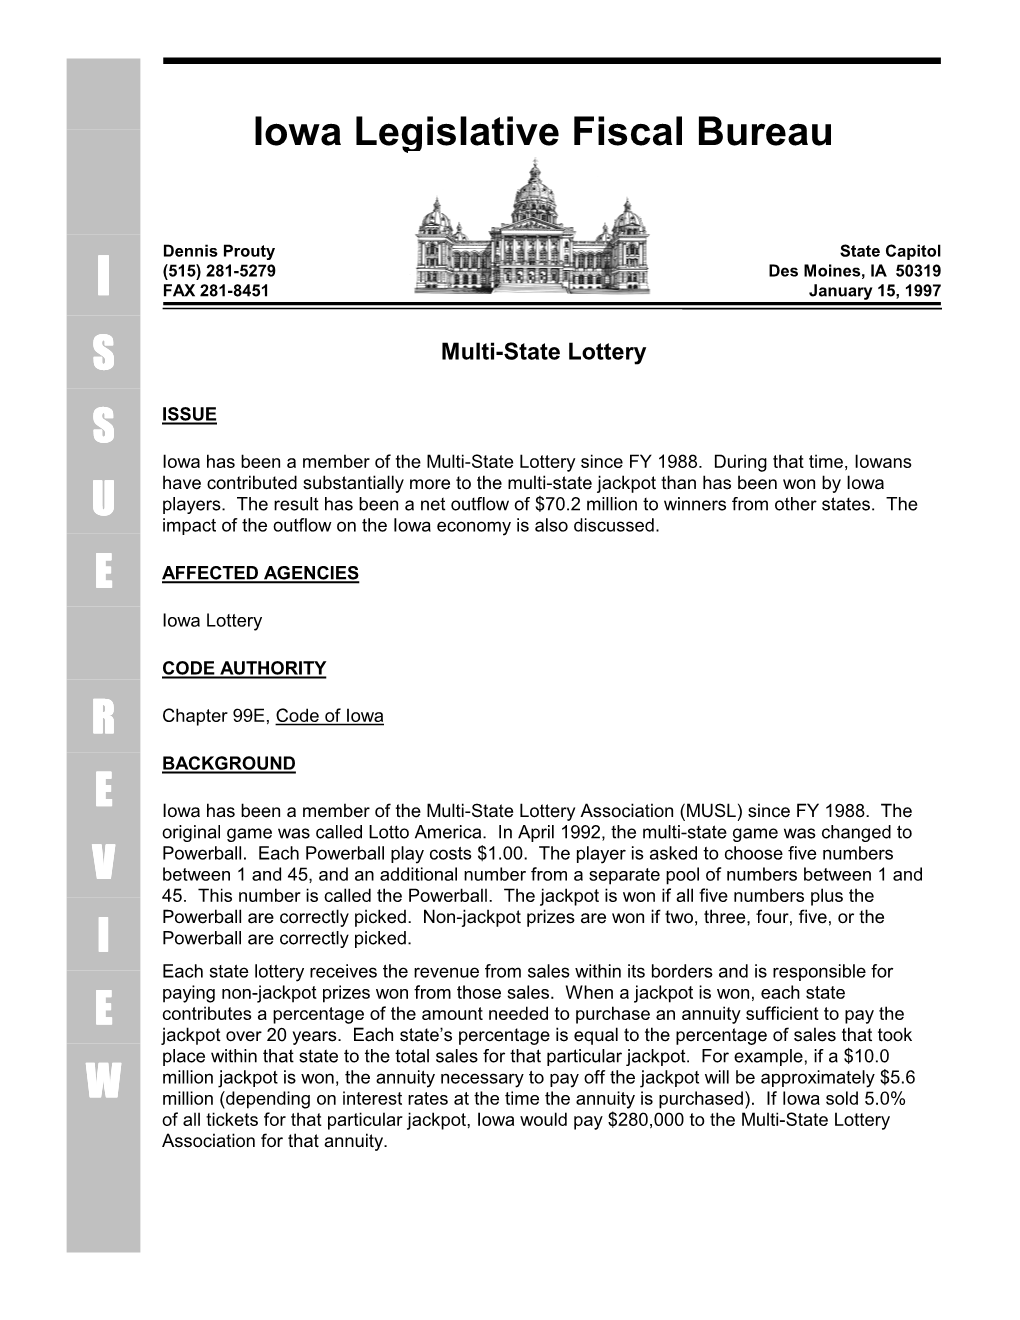 Multi-State Lottery S ISSUE Iowa Has Been a Member of the Multi-State Lottery Since FY 1988